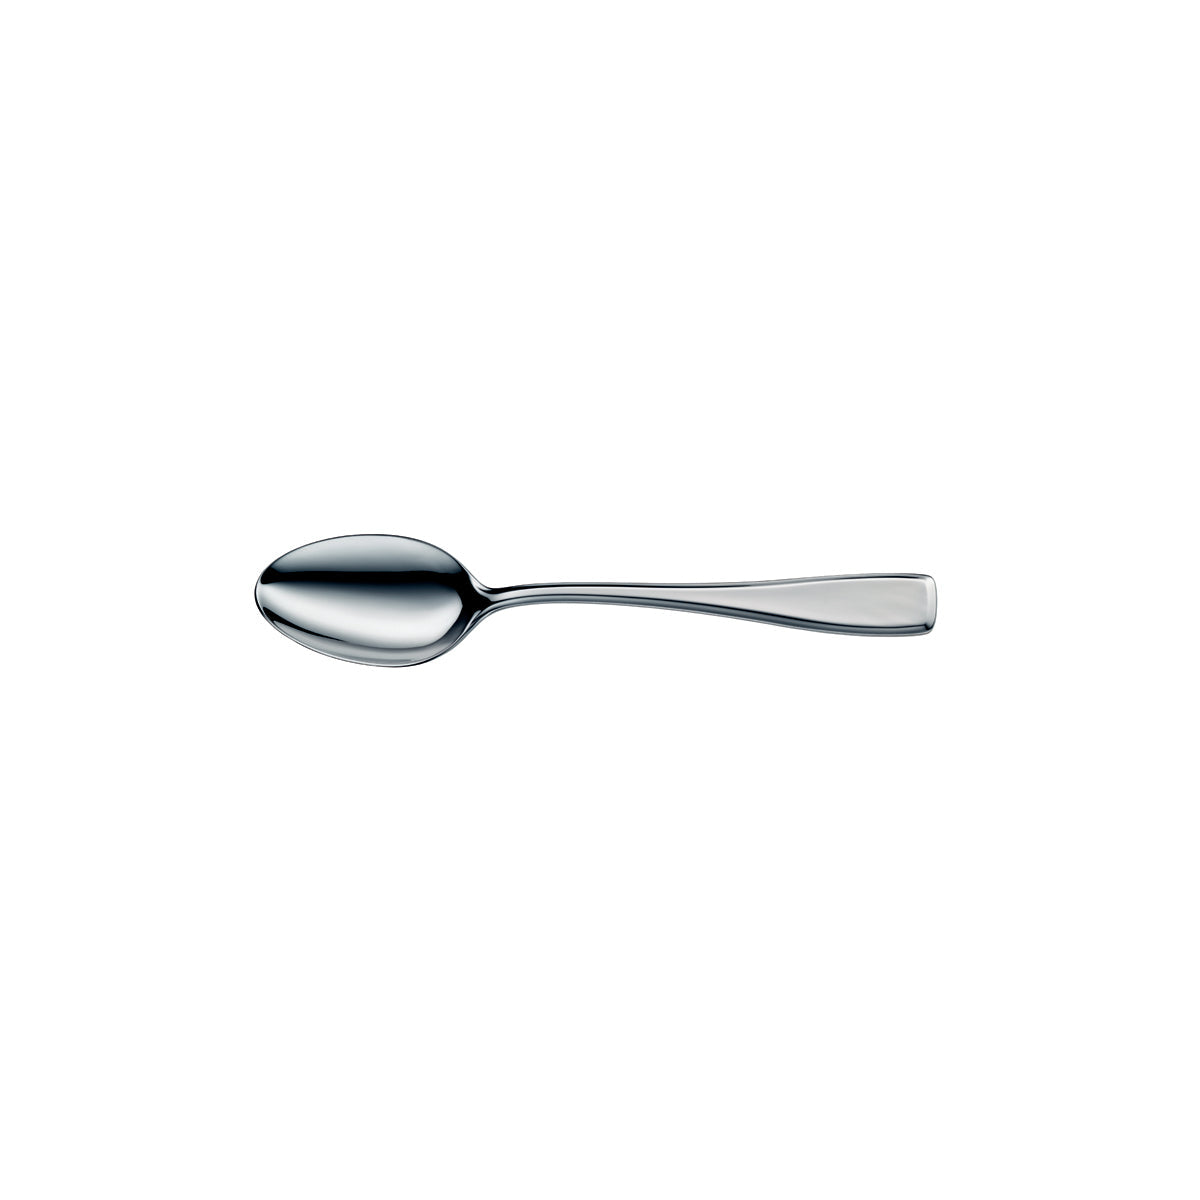 12.7901.6040 WMF Solid Table Spoon Stainless Steel Tomkin Australia Hospitality Supplies